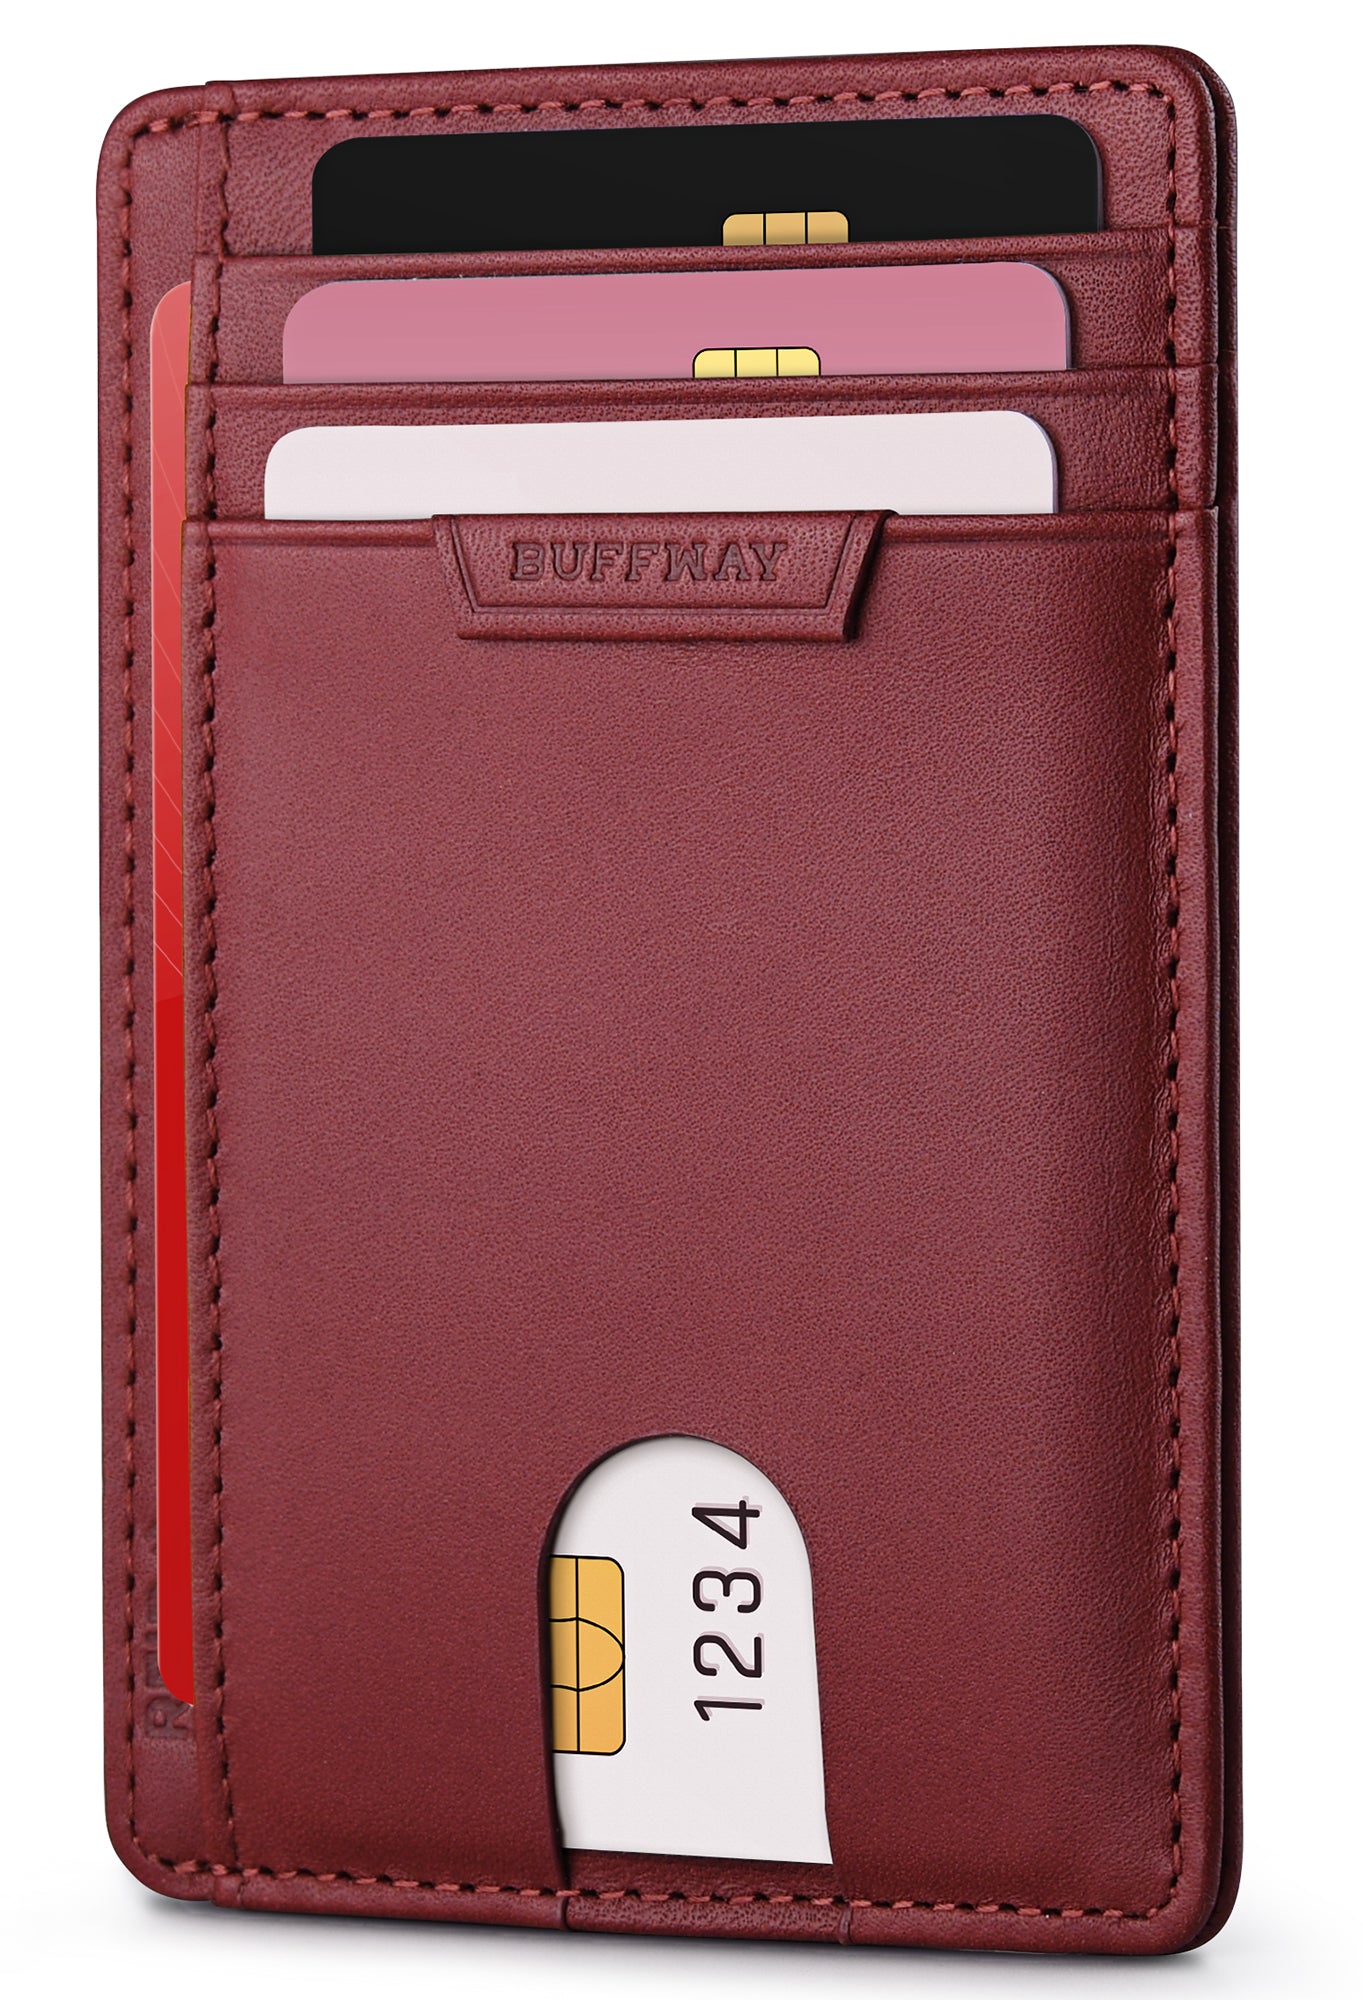 Buffway Slim Wallet for Men Women Minimalist Small Leather Front Pocket Wallets with RFID Blocking and Gifts Box - Bassa Mars Red